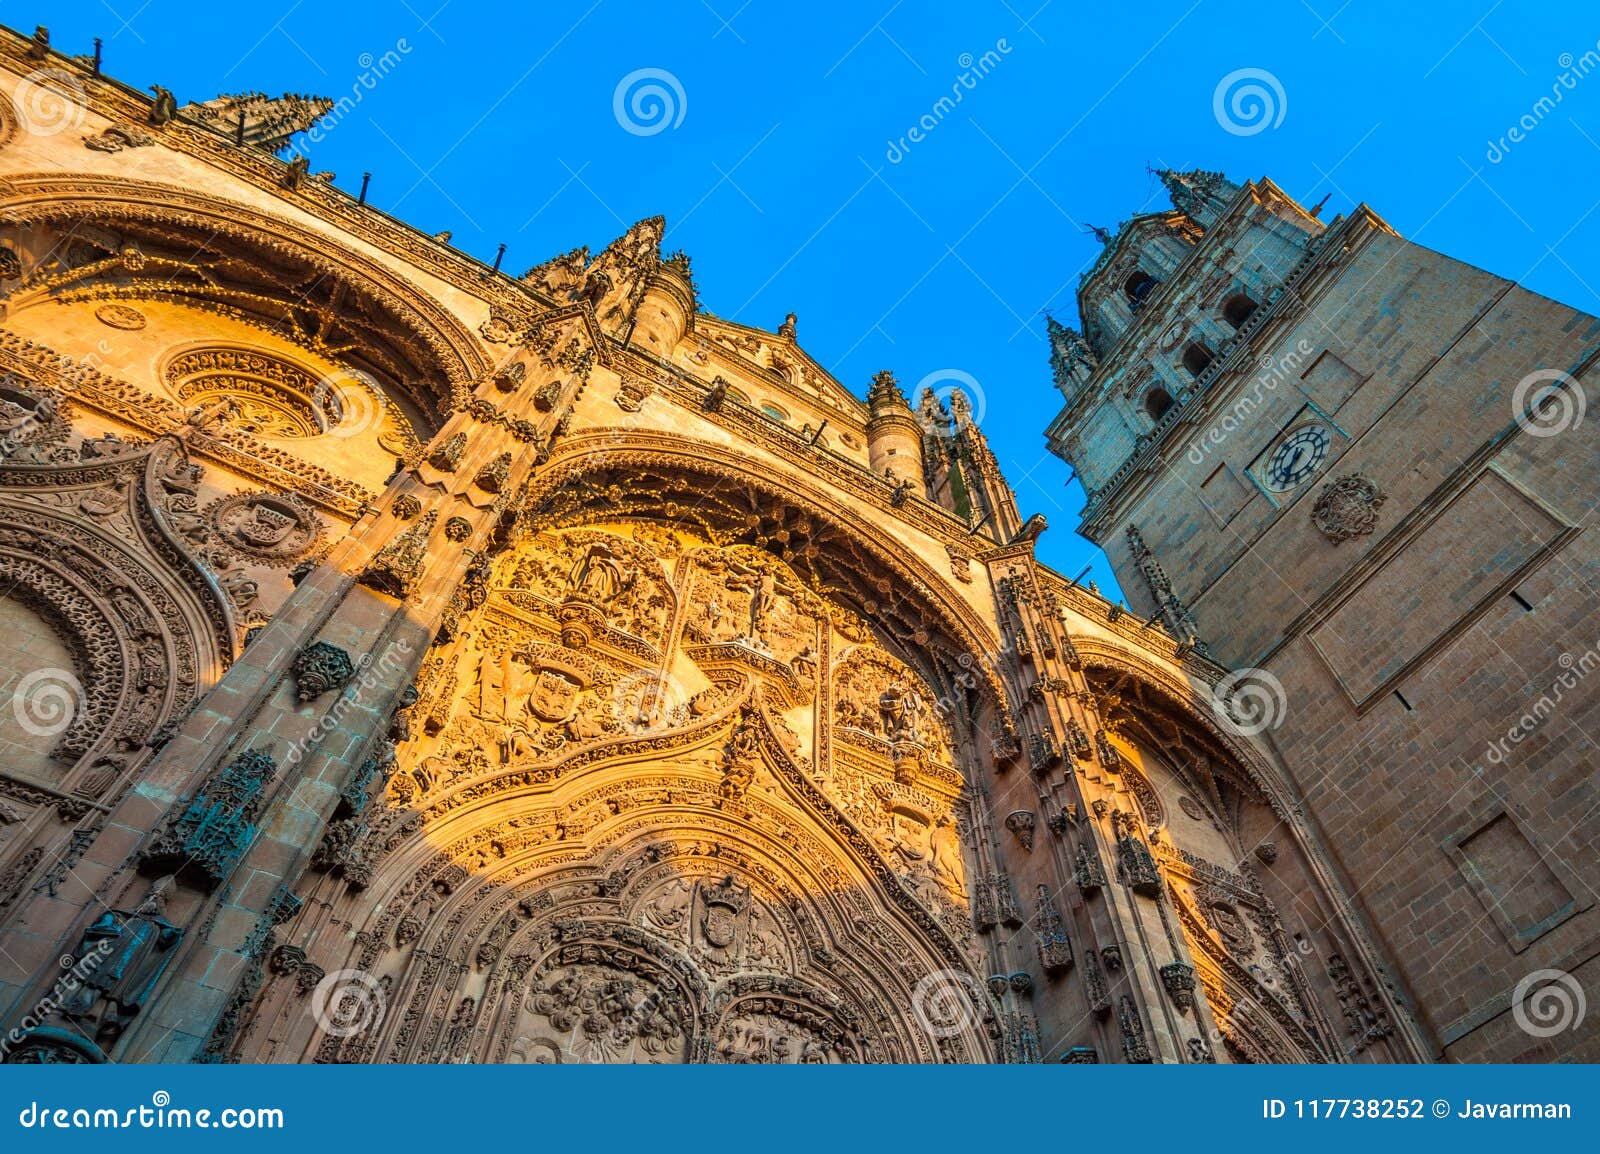 new cathedral or catedral nueva in salamanca, spain